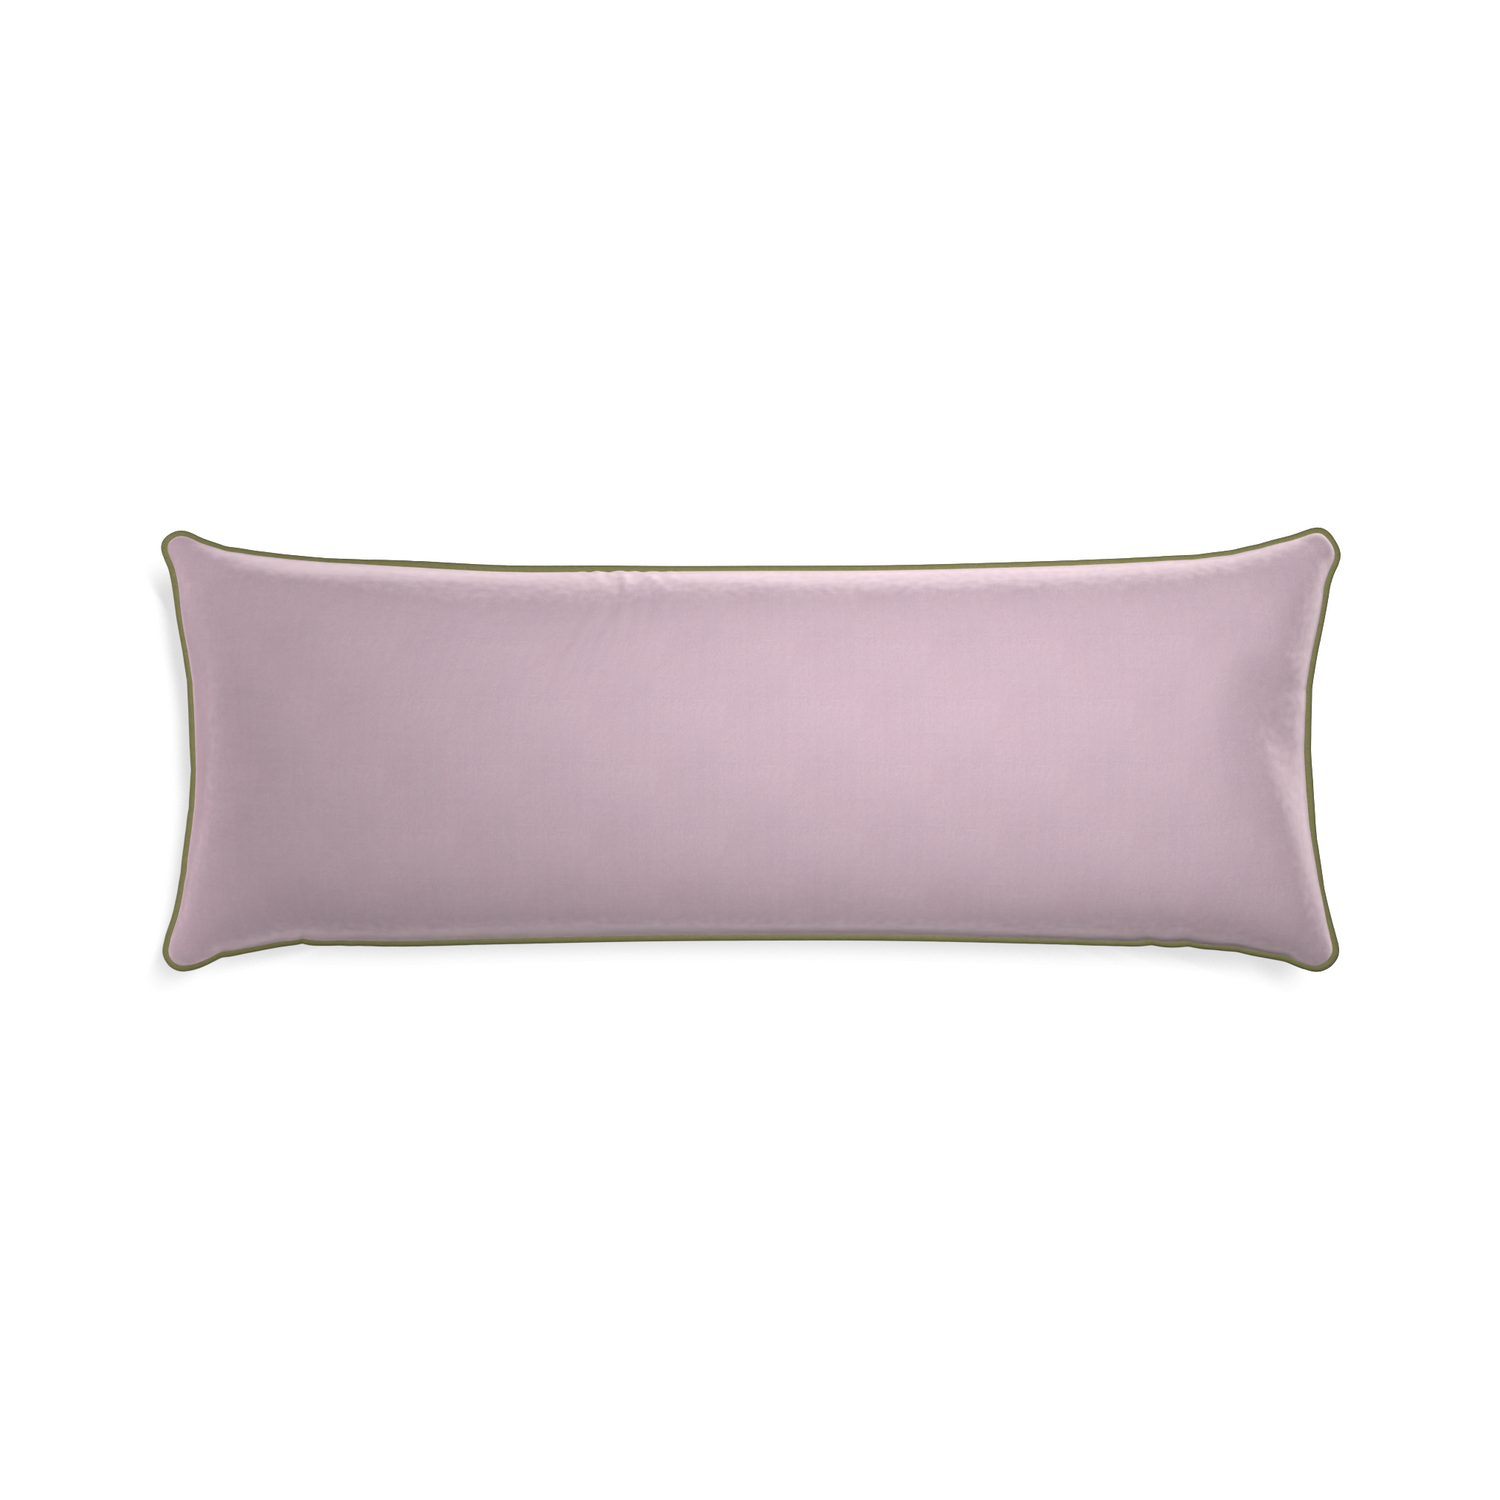 Xl-lumbar lilac velvet custom lilacpillow with moss piping on white background